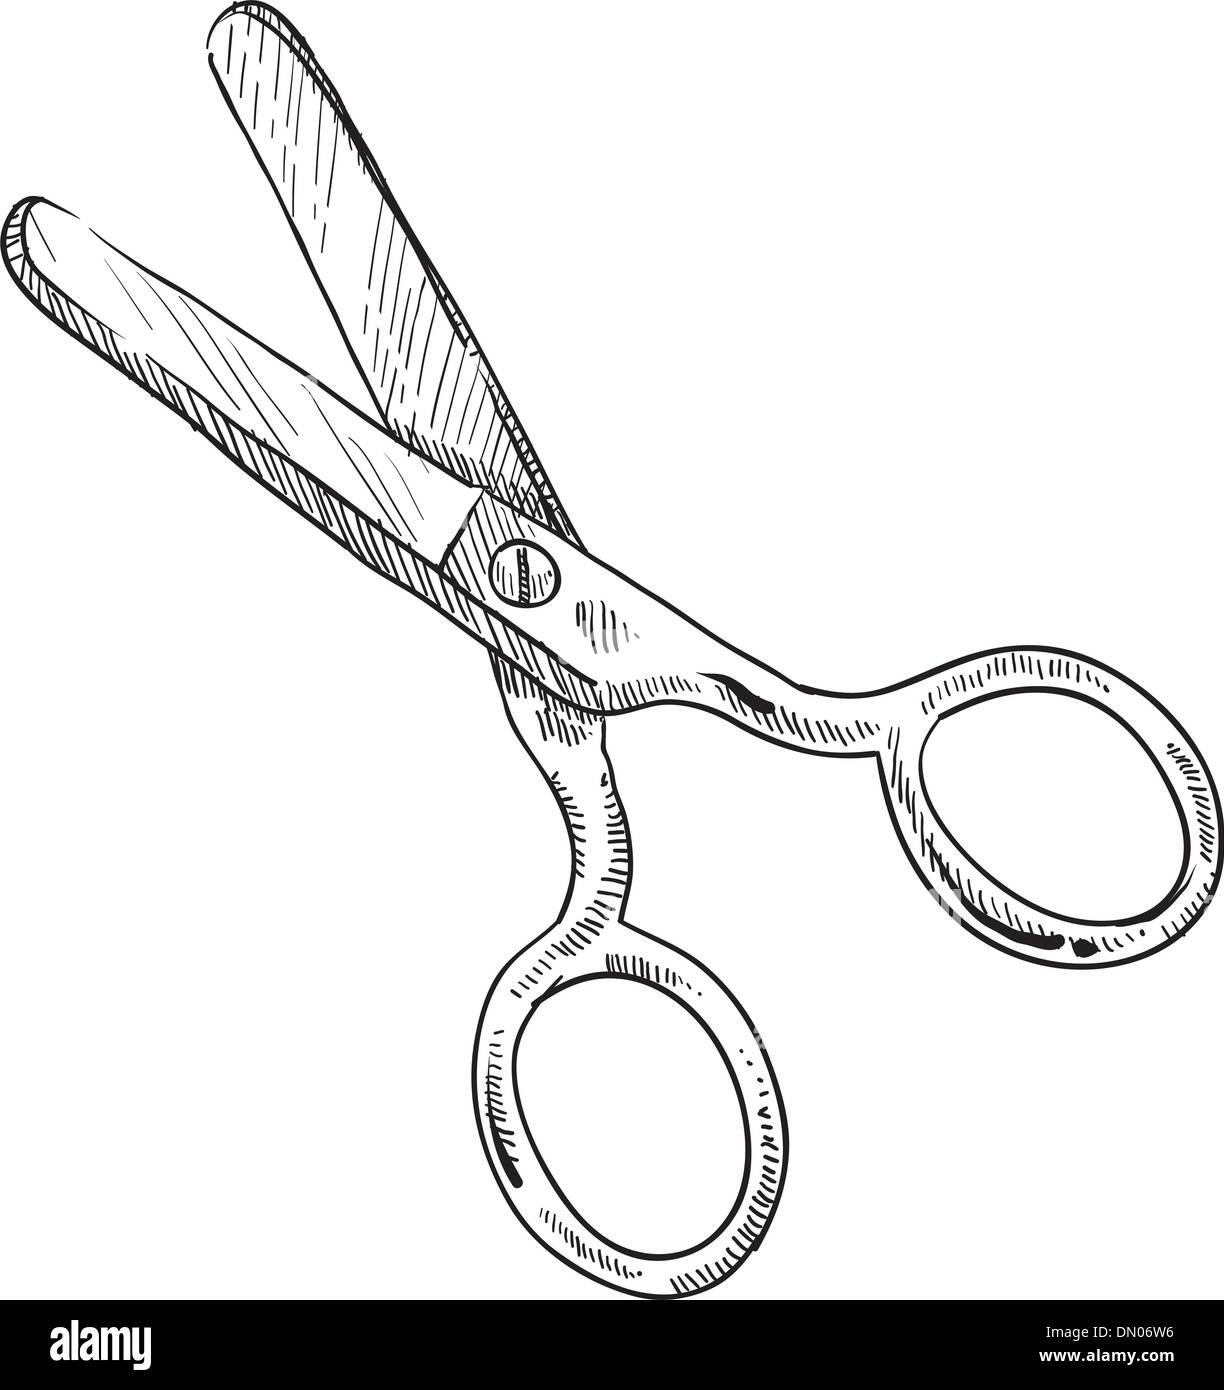 Great scissors coloring book for kids